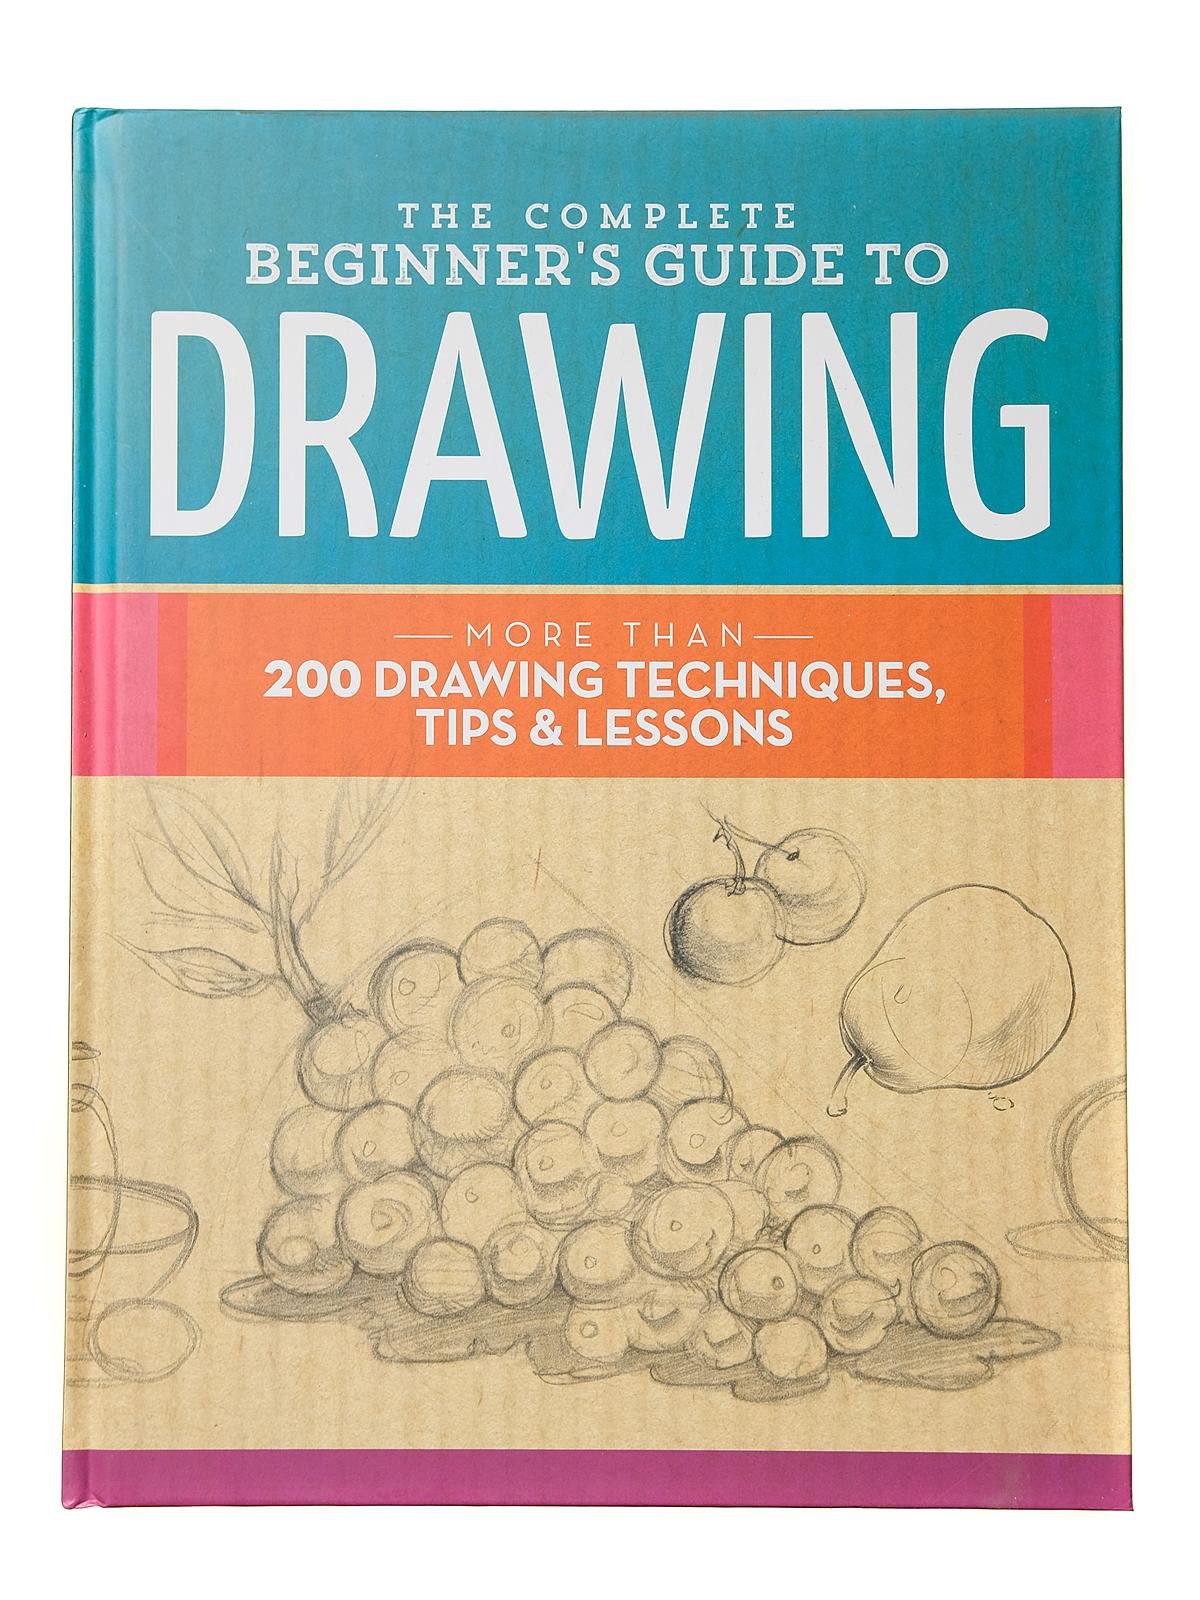 Walter Foster - The Complete Beginner's Guide to Drawing